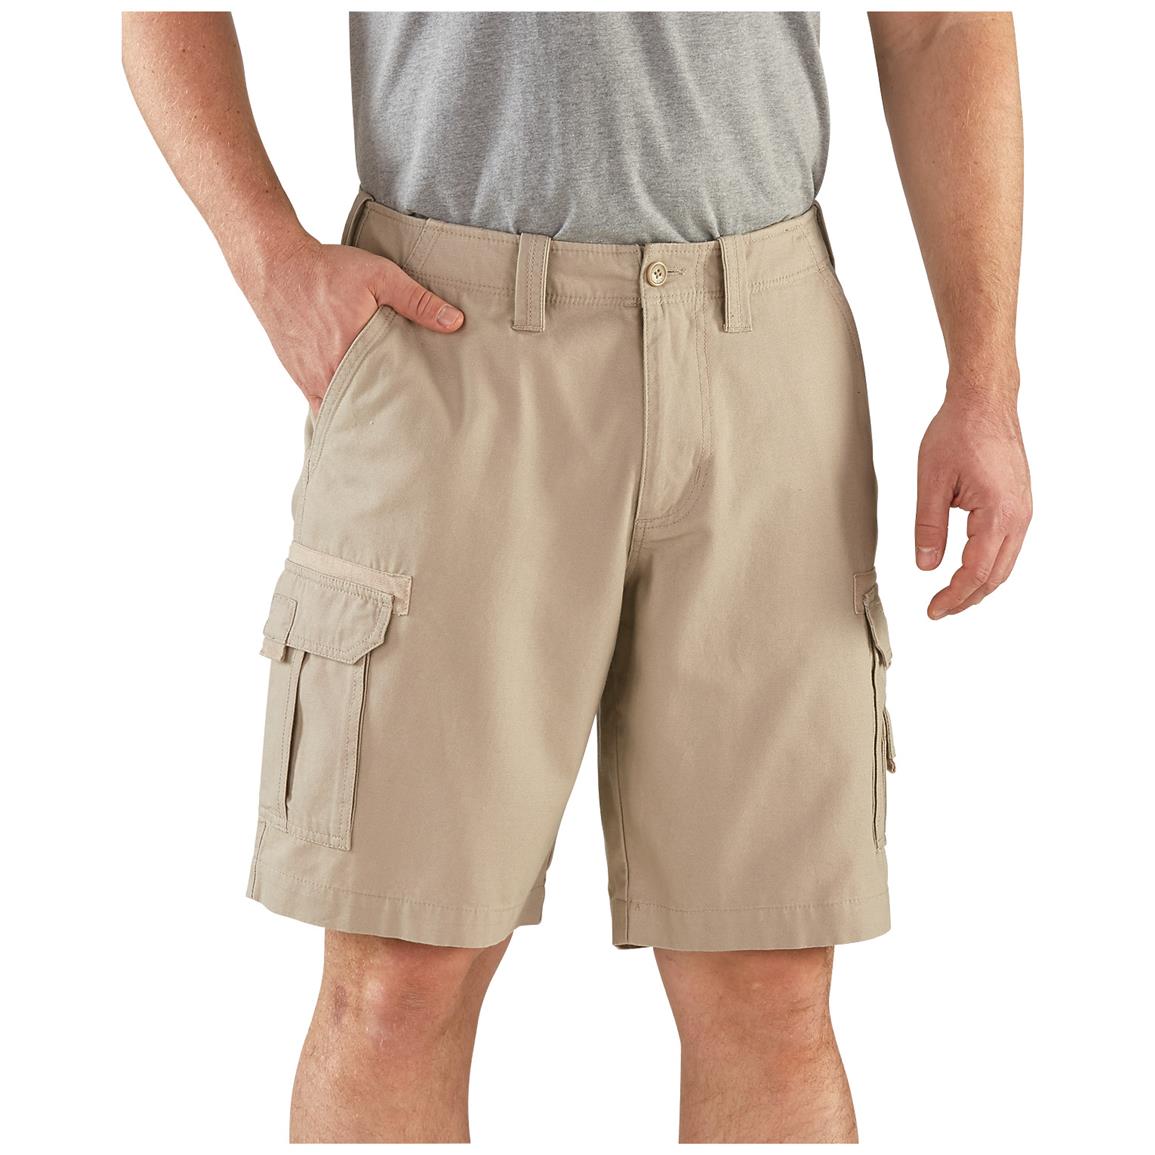 Guide Gear Men S Outdoor Cargo Shorts 10 Inseam 660708 Shorts At Sportsman S Guide